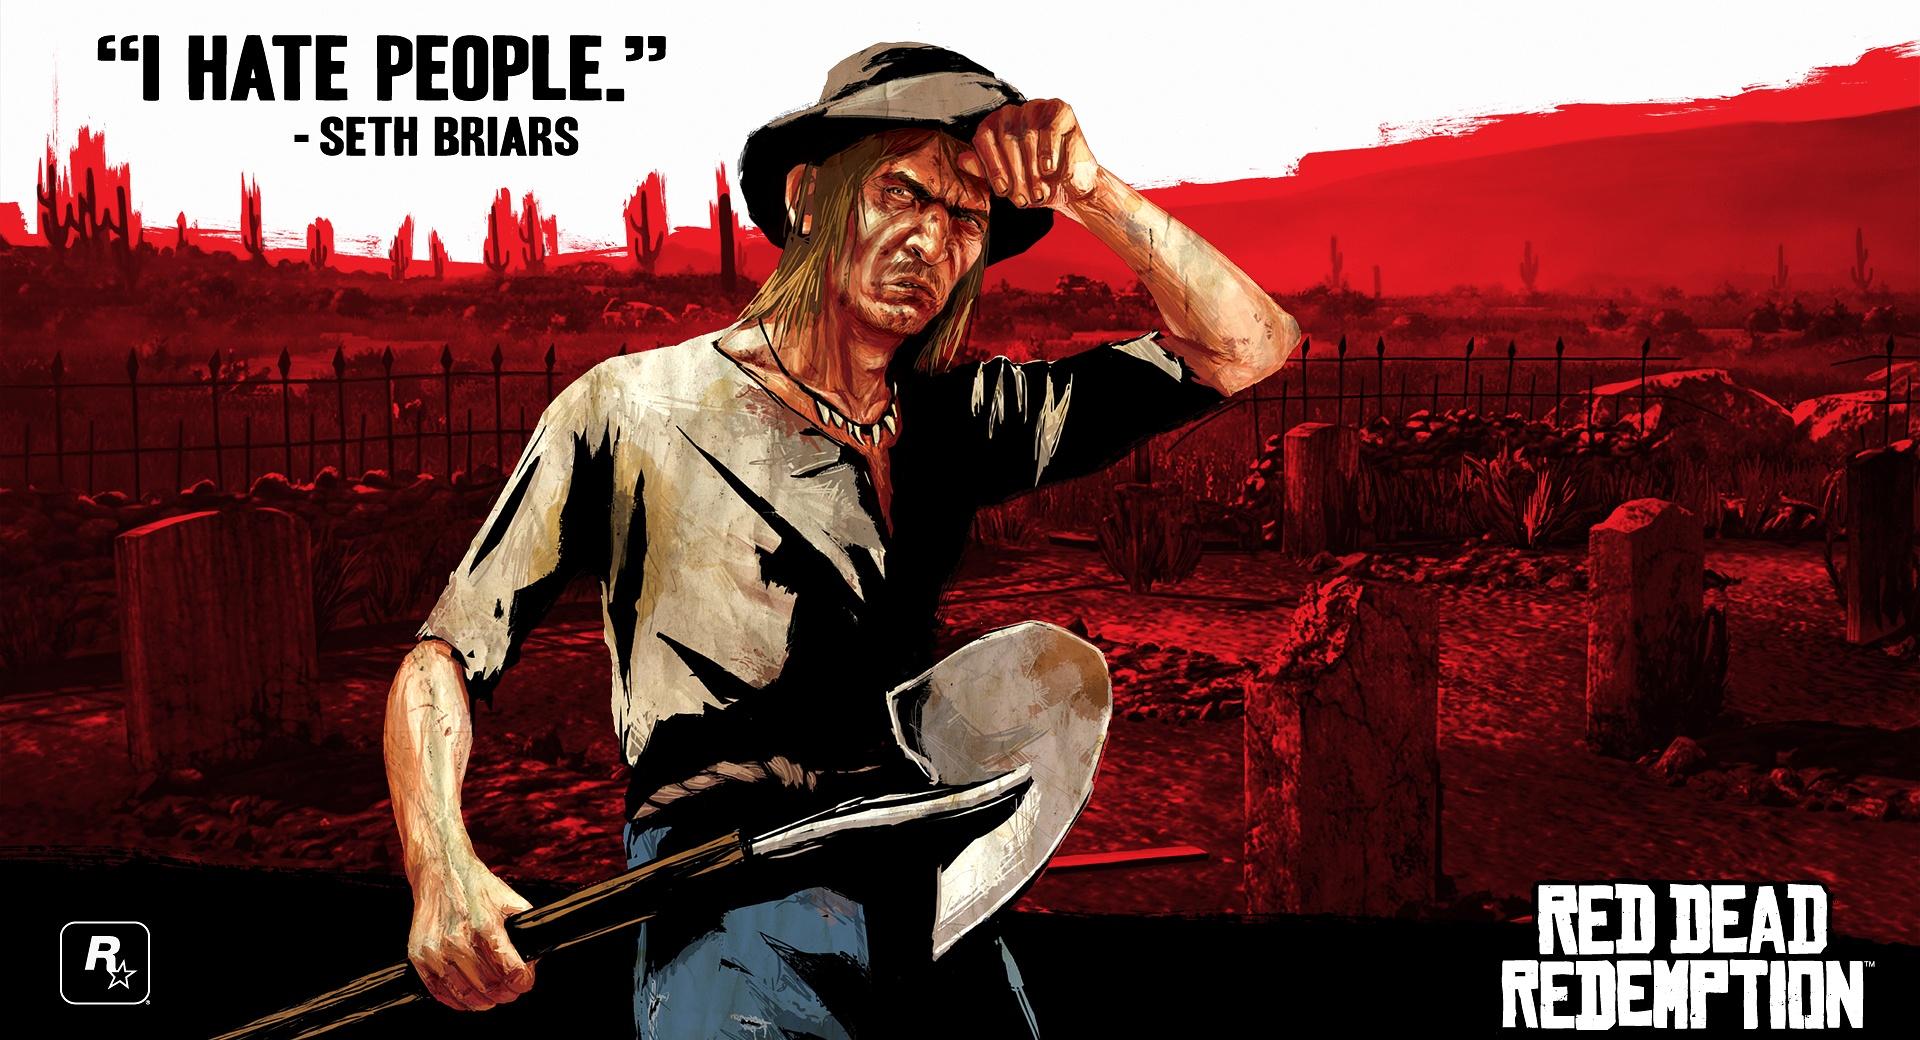 Red Dead Redemption, Seth wallpapers HD quality